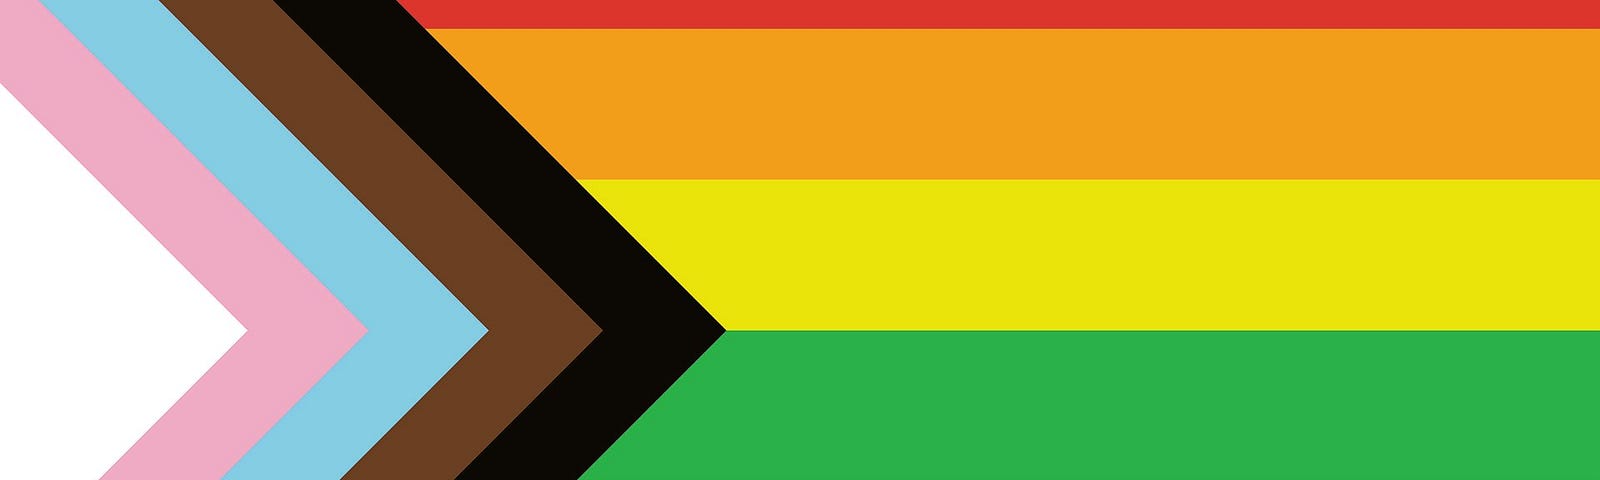 A pride flag is depicted. It includes horizontal stripes with a red stripe at top followed by orange, yellow, green, blue, and purple stripes below. On the left side of the flag is a white triangle followed to the right by pink, blue, brown, and black chevrons.